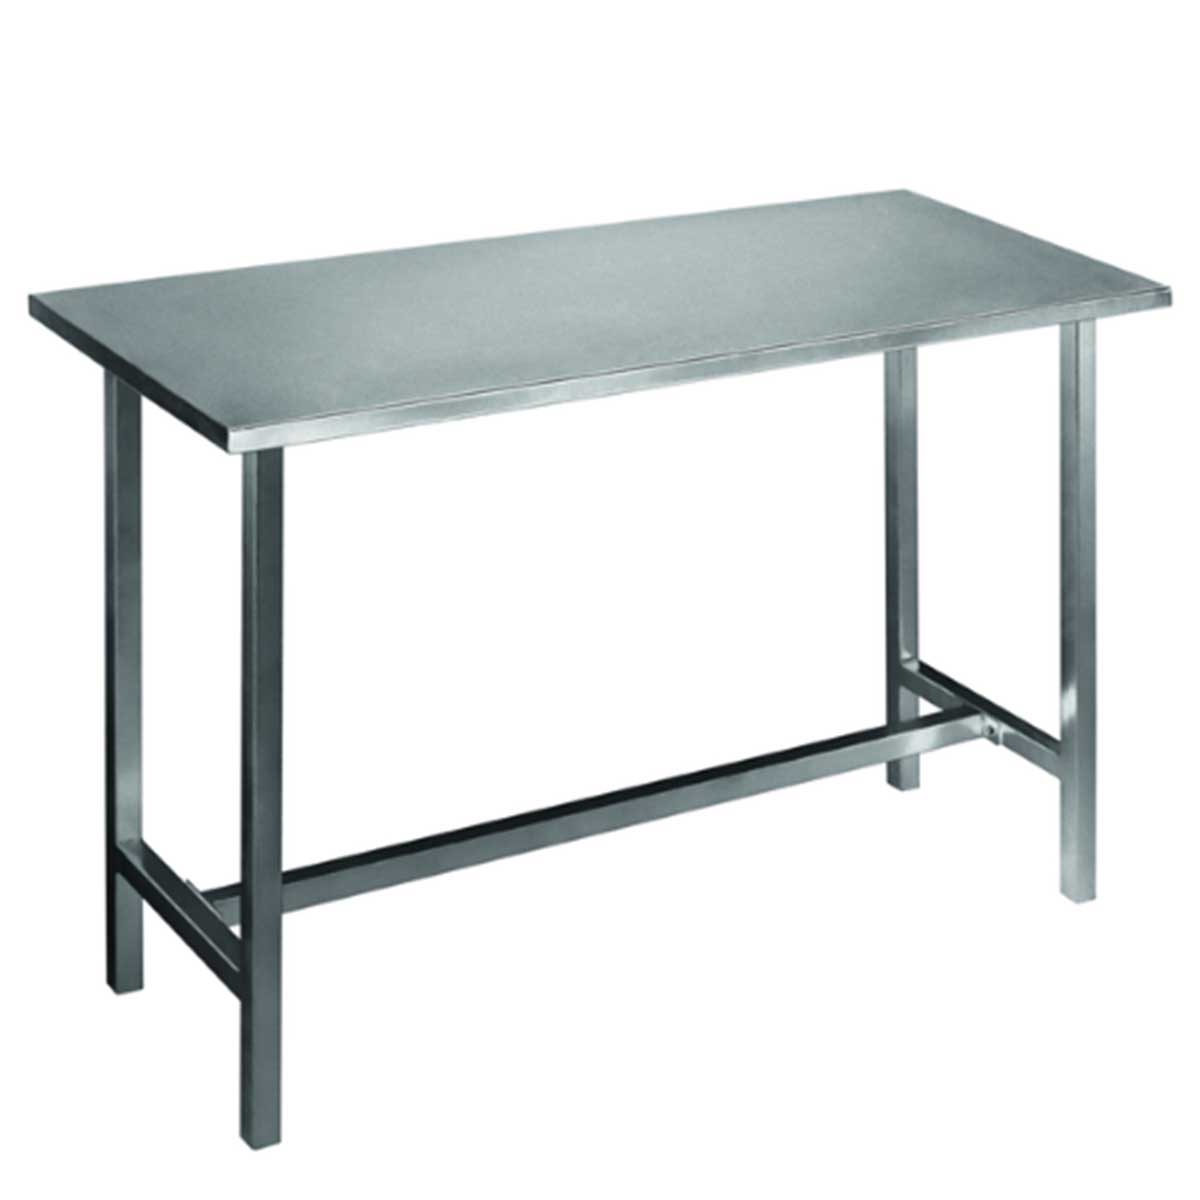 Metal Office Table Manufacturers, Suppliers in Noida Sector 63